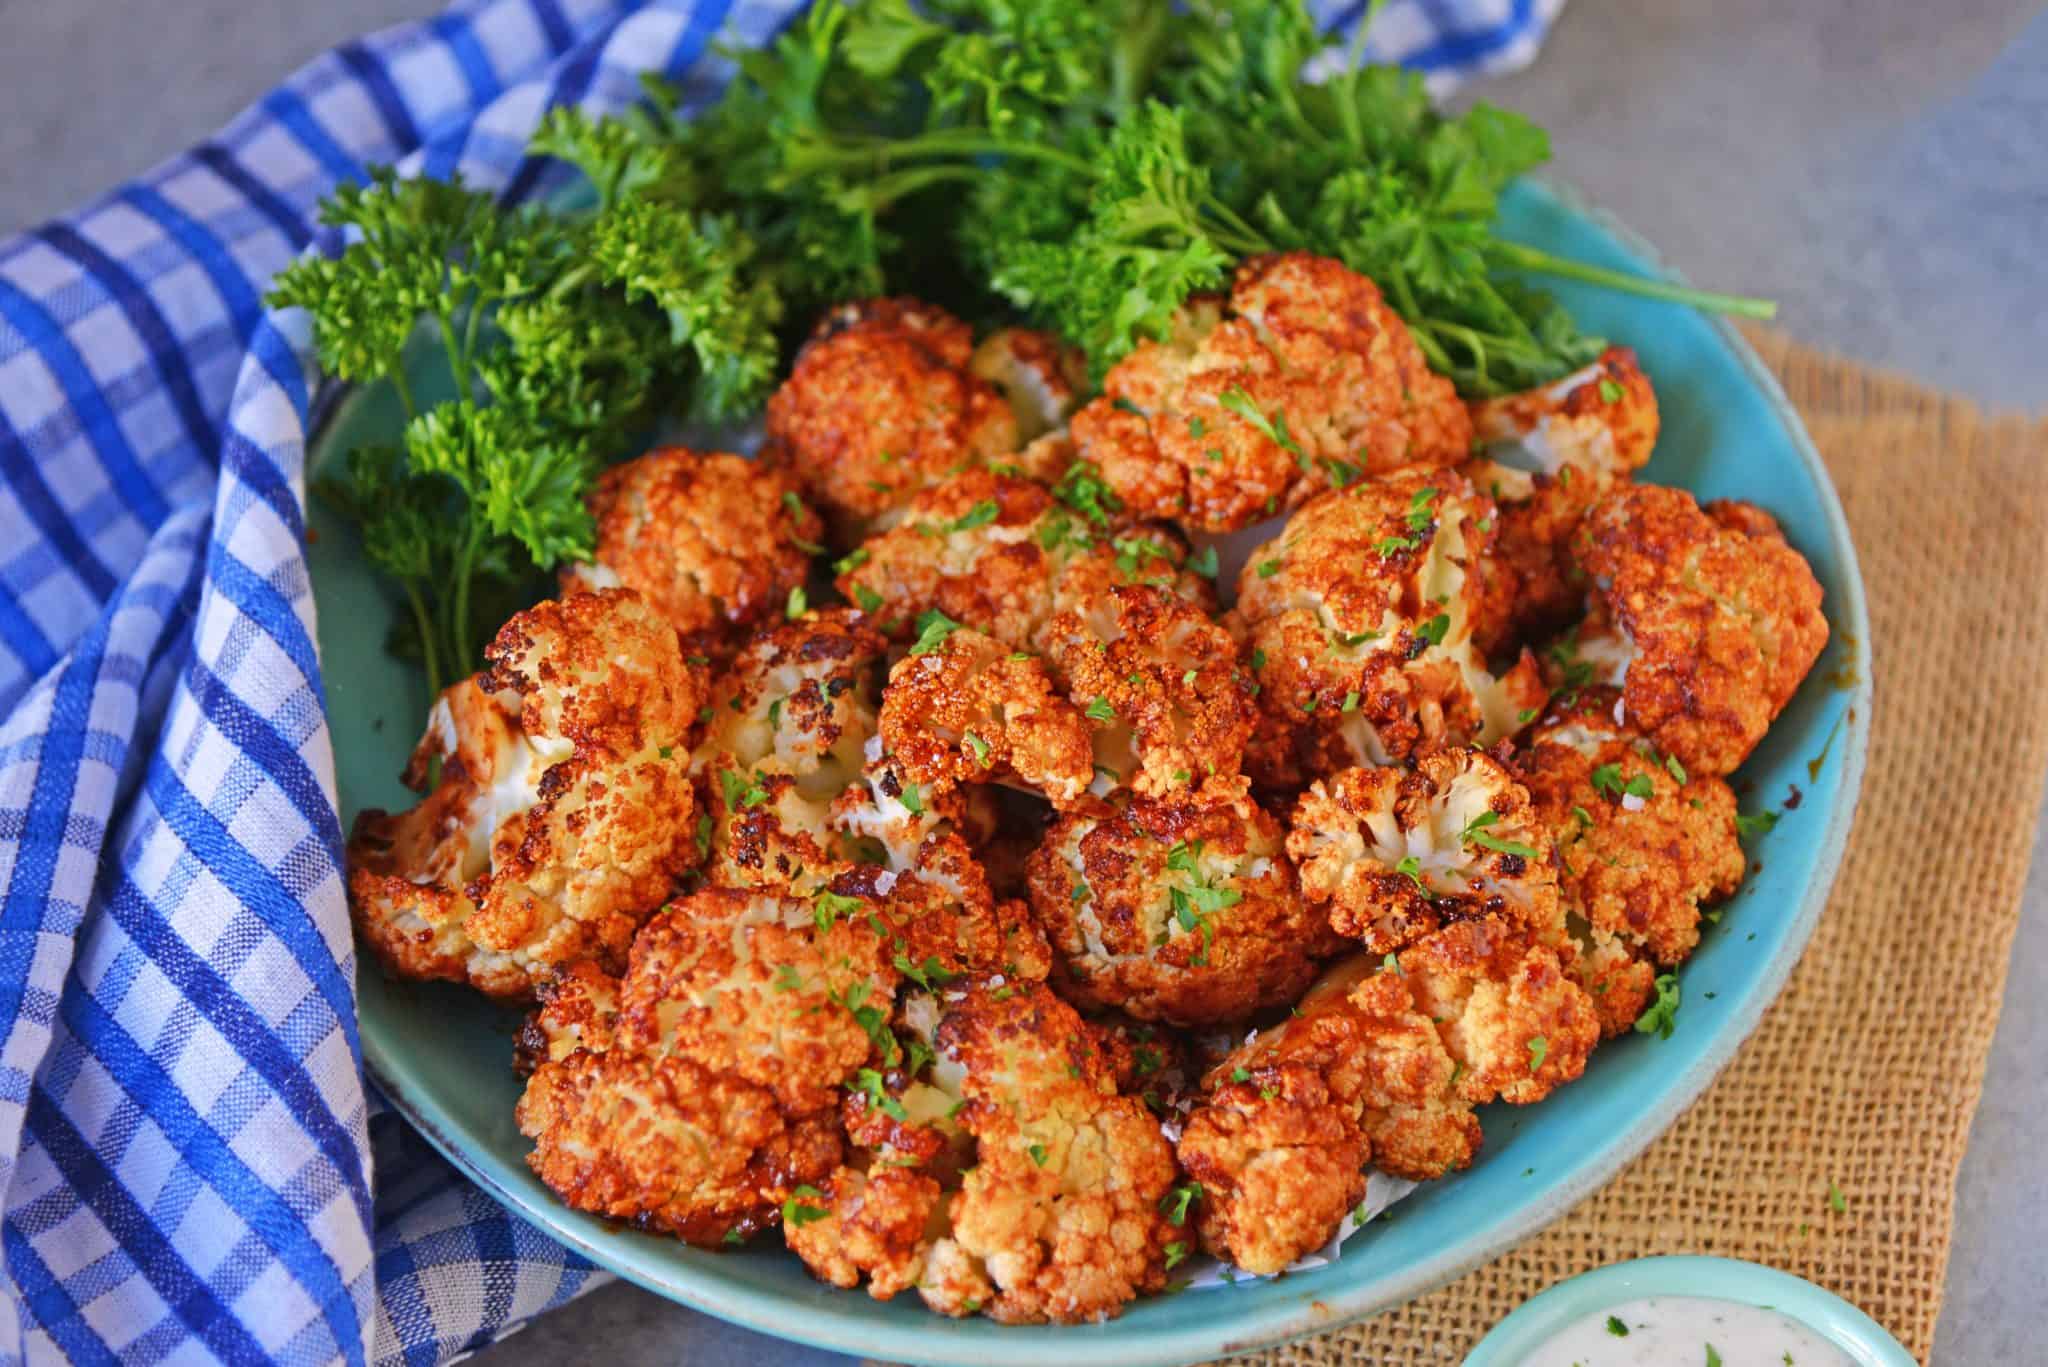 BBQ Cauliflower Bites make a healthy and quick appetizer or side. Make them zesty, tangy or even sweet! #cauliflowerrecipes #bbqcauliflowerbites www.savoryexperiments.com